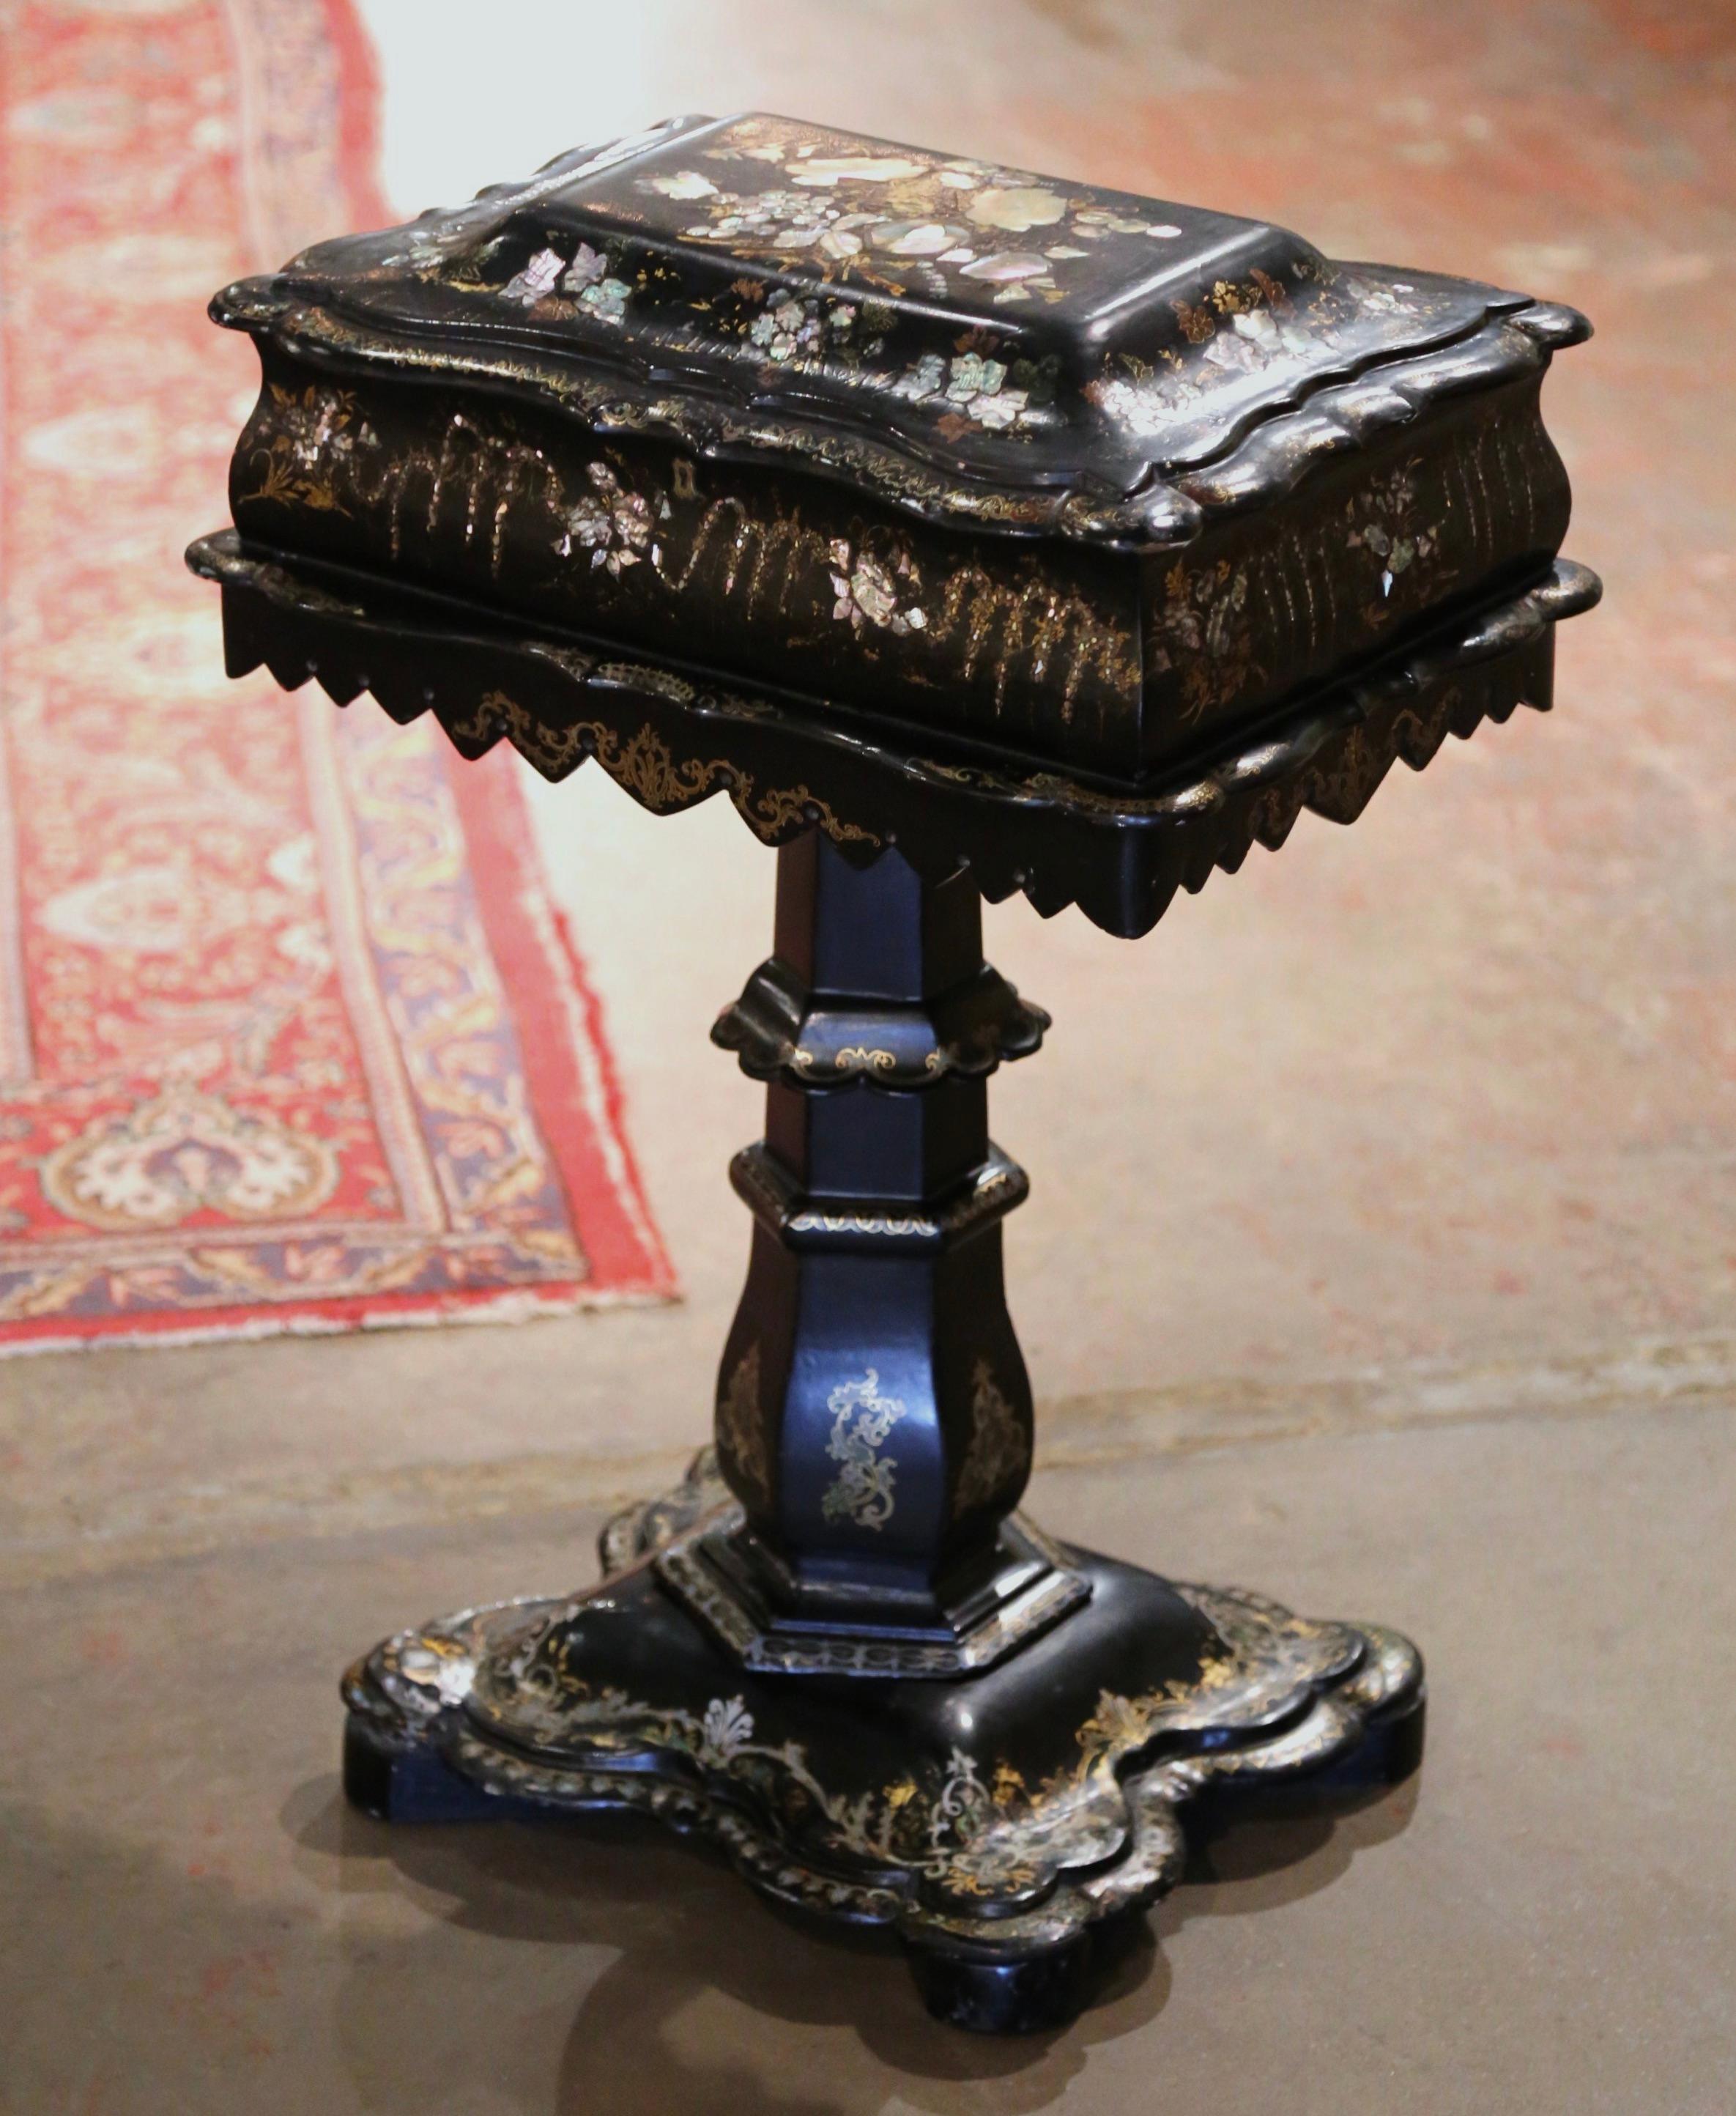 This elegant, hand painted antique sewing table was created in England circa 1880. Standing on a rectangular base with scalloped edges over a thick carved central stem, the cabinet built of 